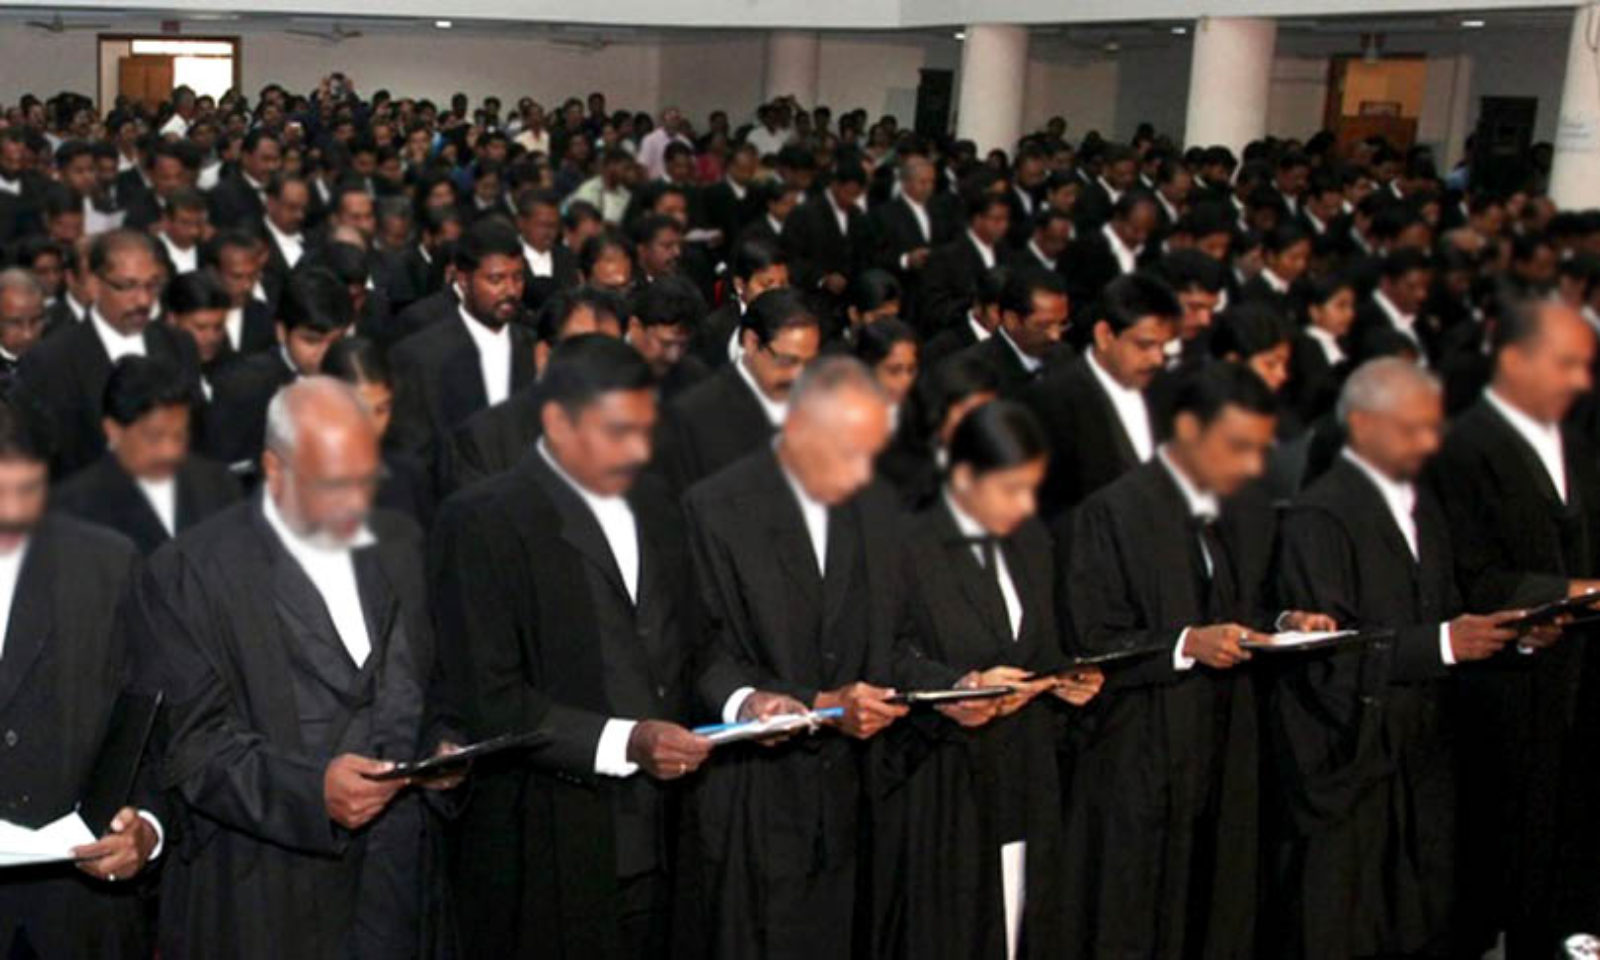 Inspiring story of convict turning into a lawyer proves wrong; faces probe  for forging certificates | Onmanorama